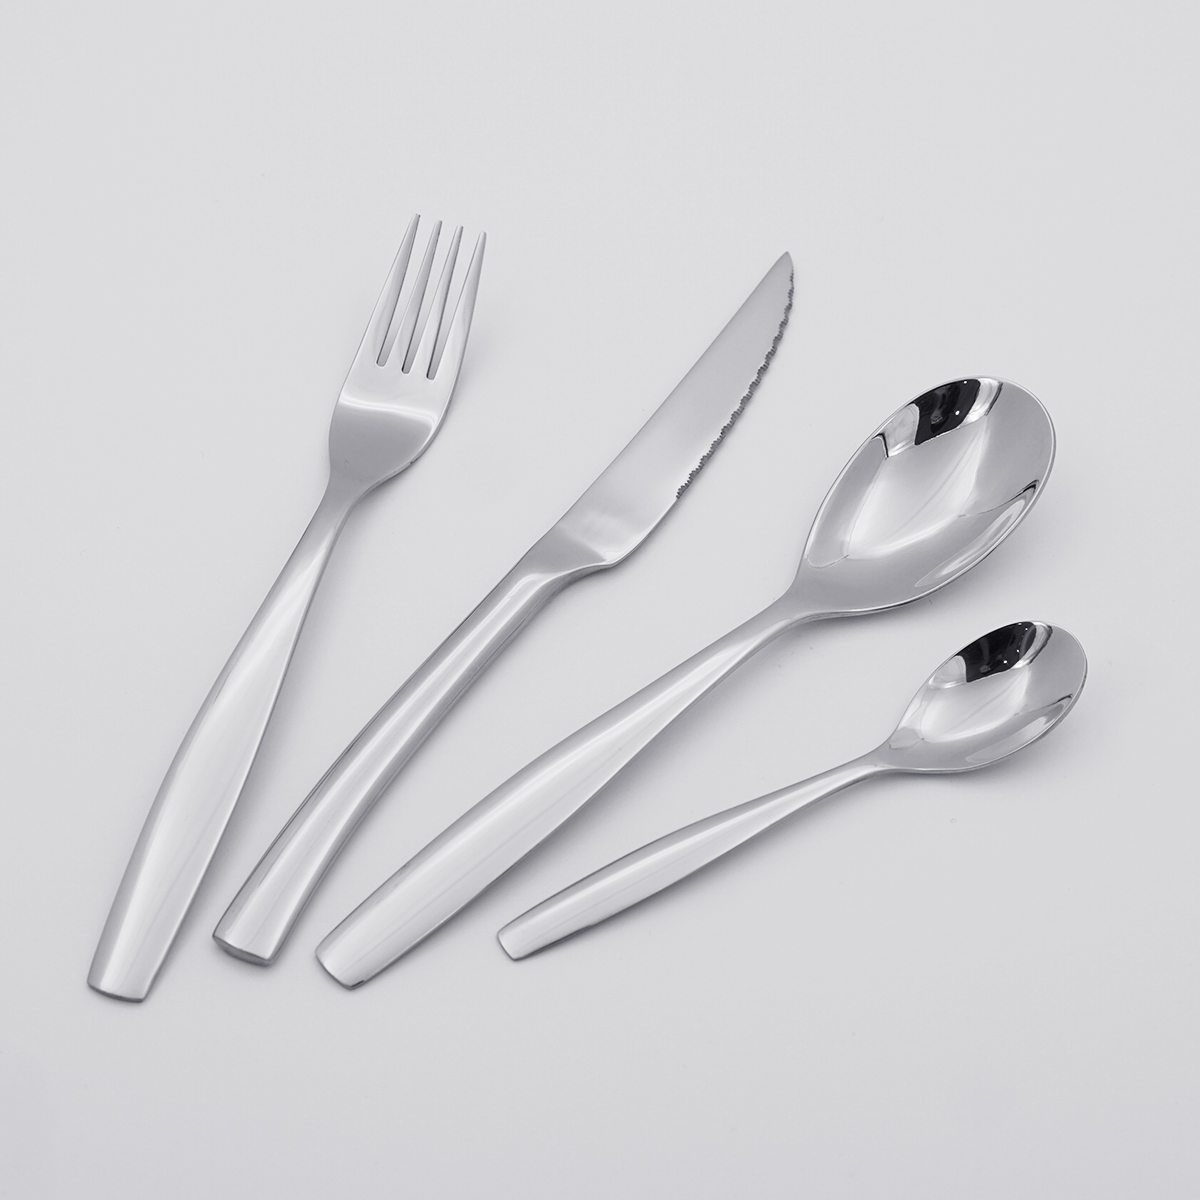 Wholesale High Quality Low MOQ Cheap Price Flatware Set Silverware Stainless Steel Cutlery for Restaurant Hotel